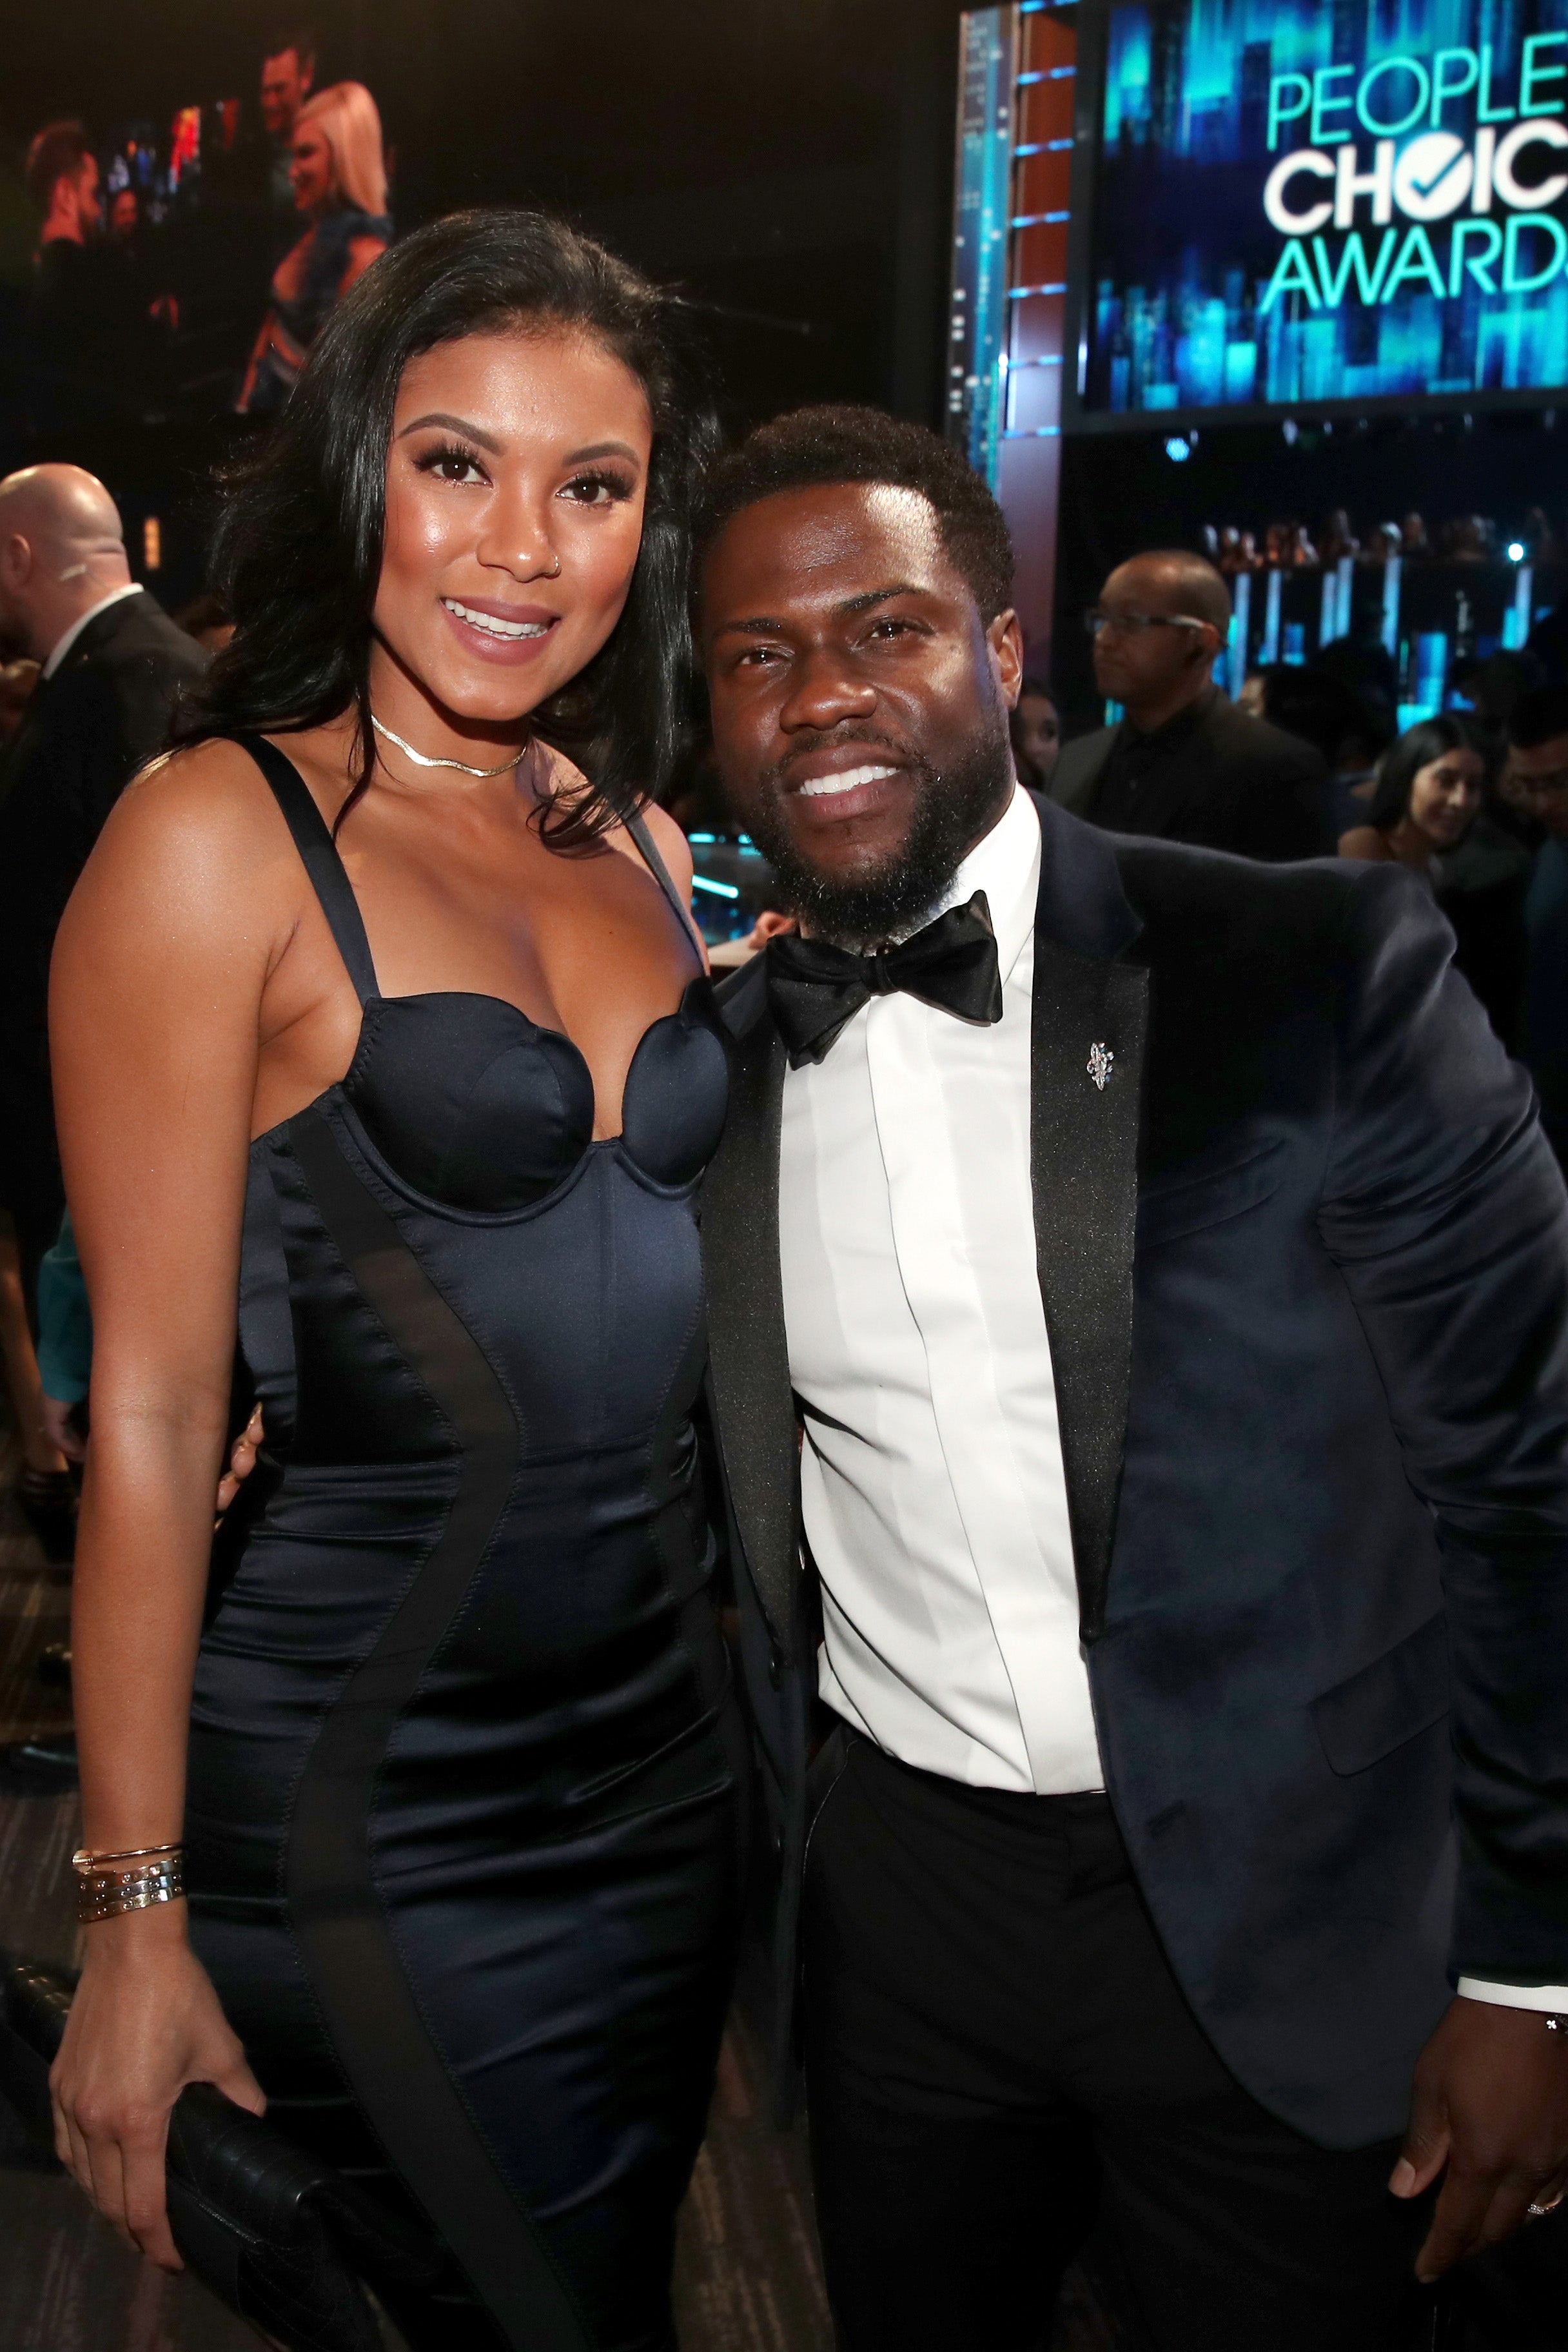 Gabrielle Union and Dwyane Wade, Kevin Hart and More!
